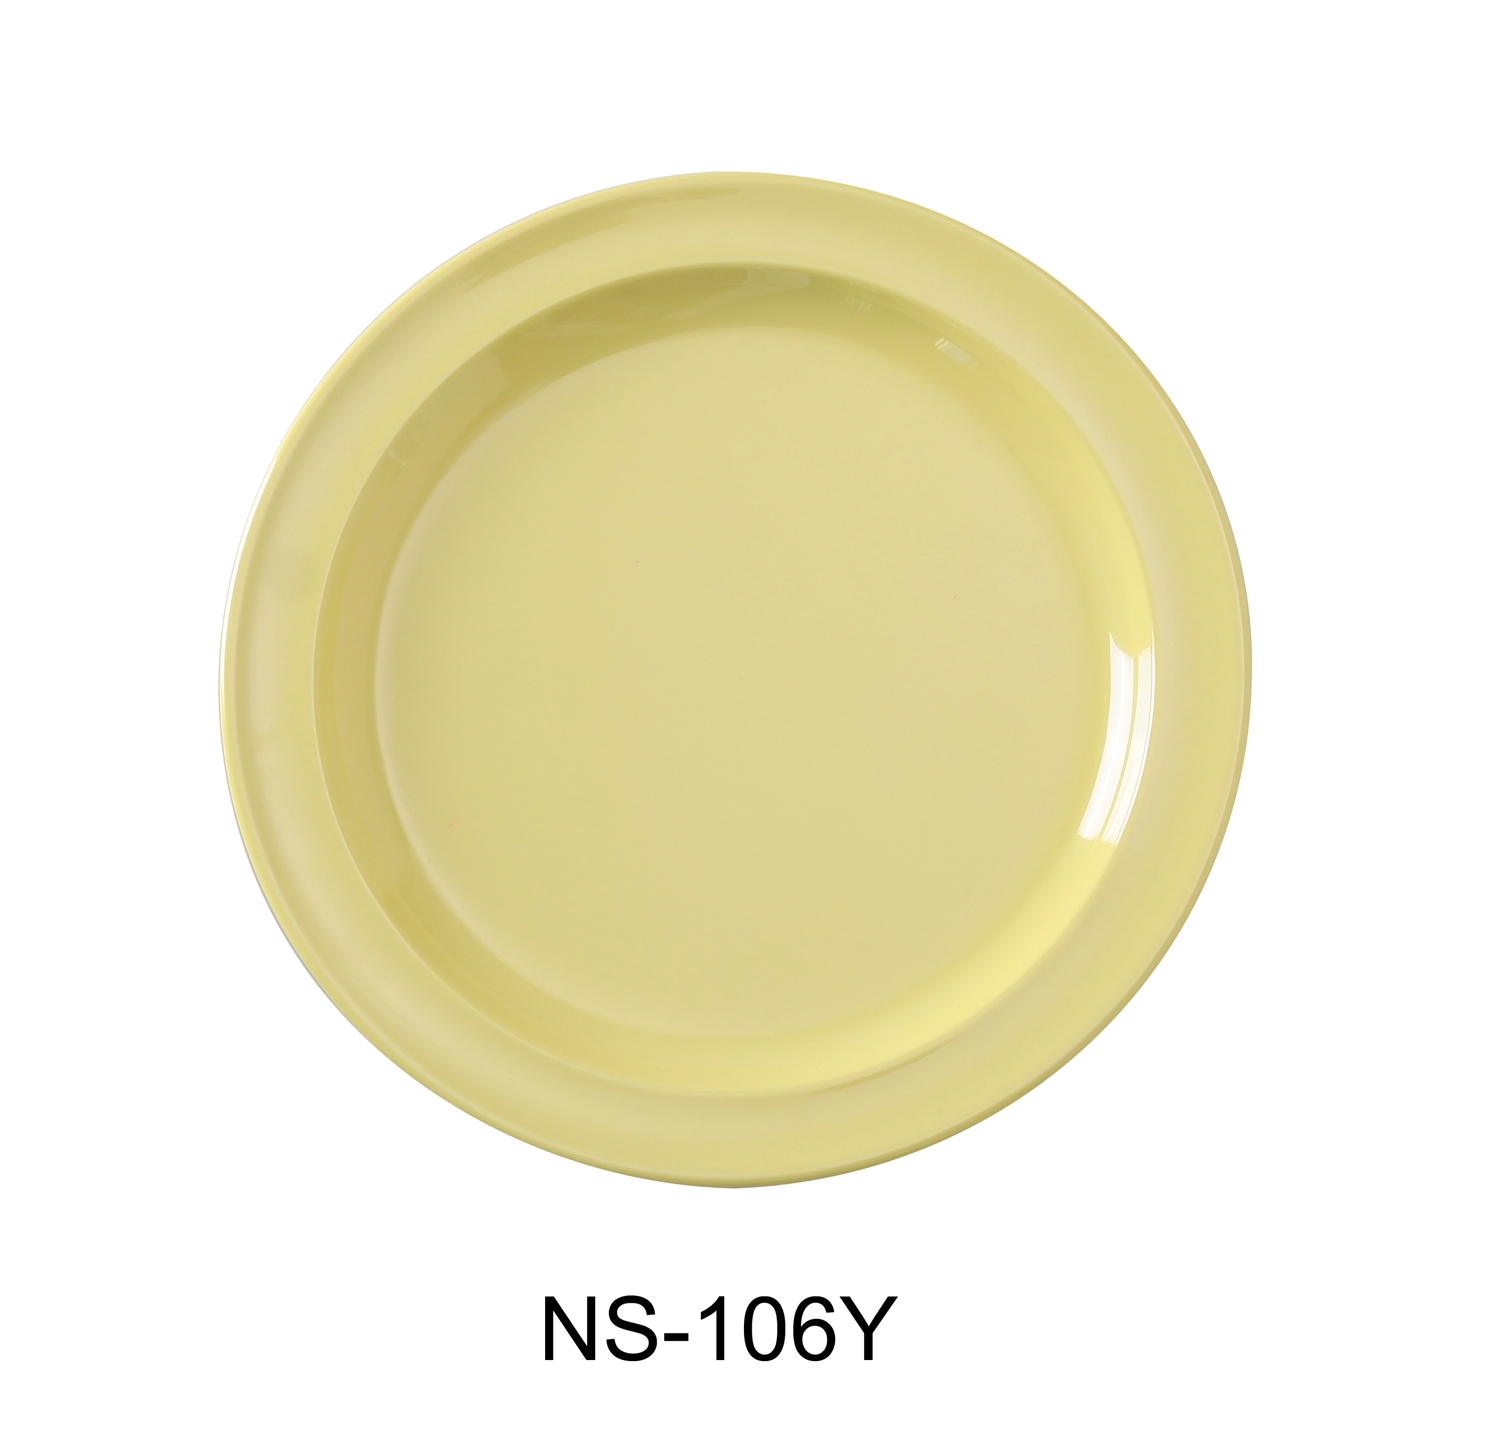 Yanco NS-106Y Nessico Round Plate, 6.5" Diameter, Melamine, Yellow Color - by Celebrate Festival Inc